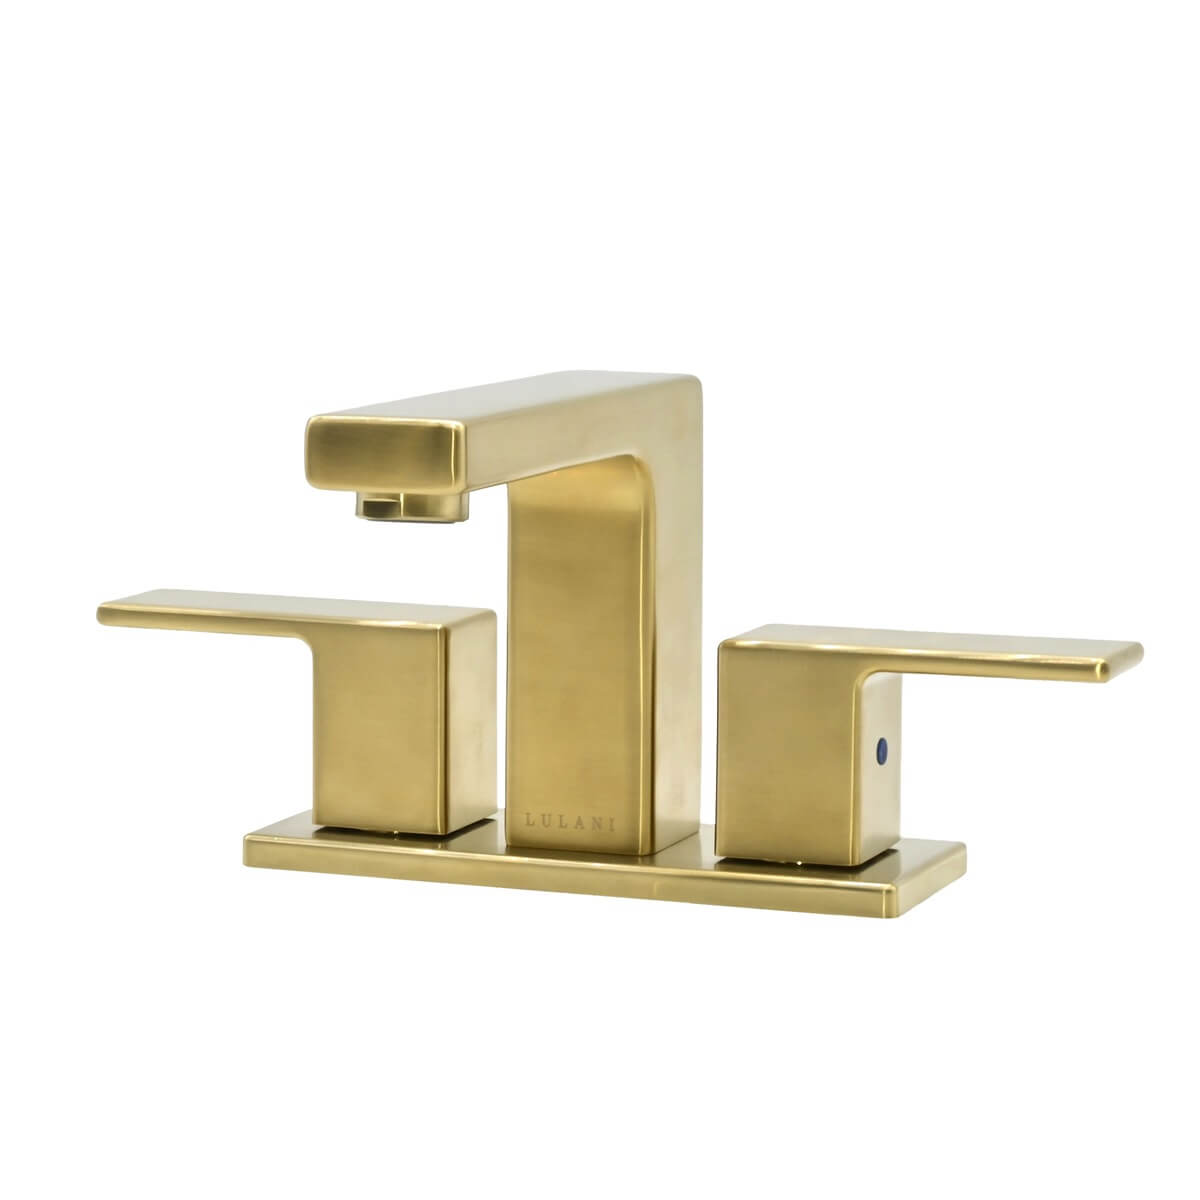 Capri 2 Handle 3 Hole Centerset Brass Bathroom Faucet with drain assembly